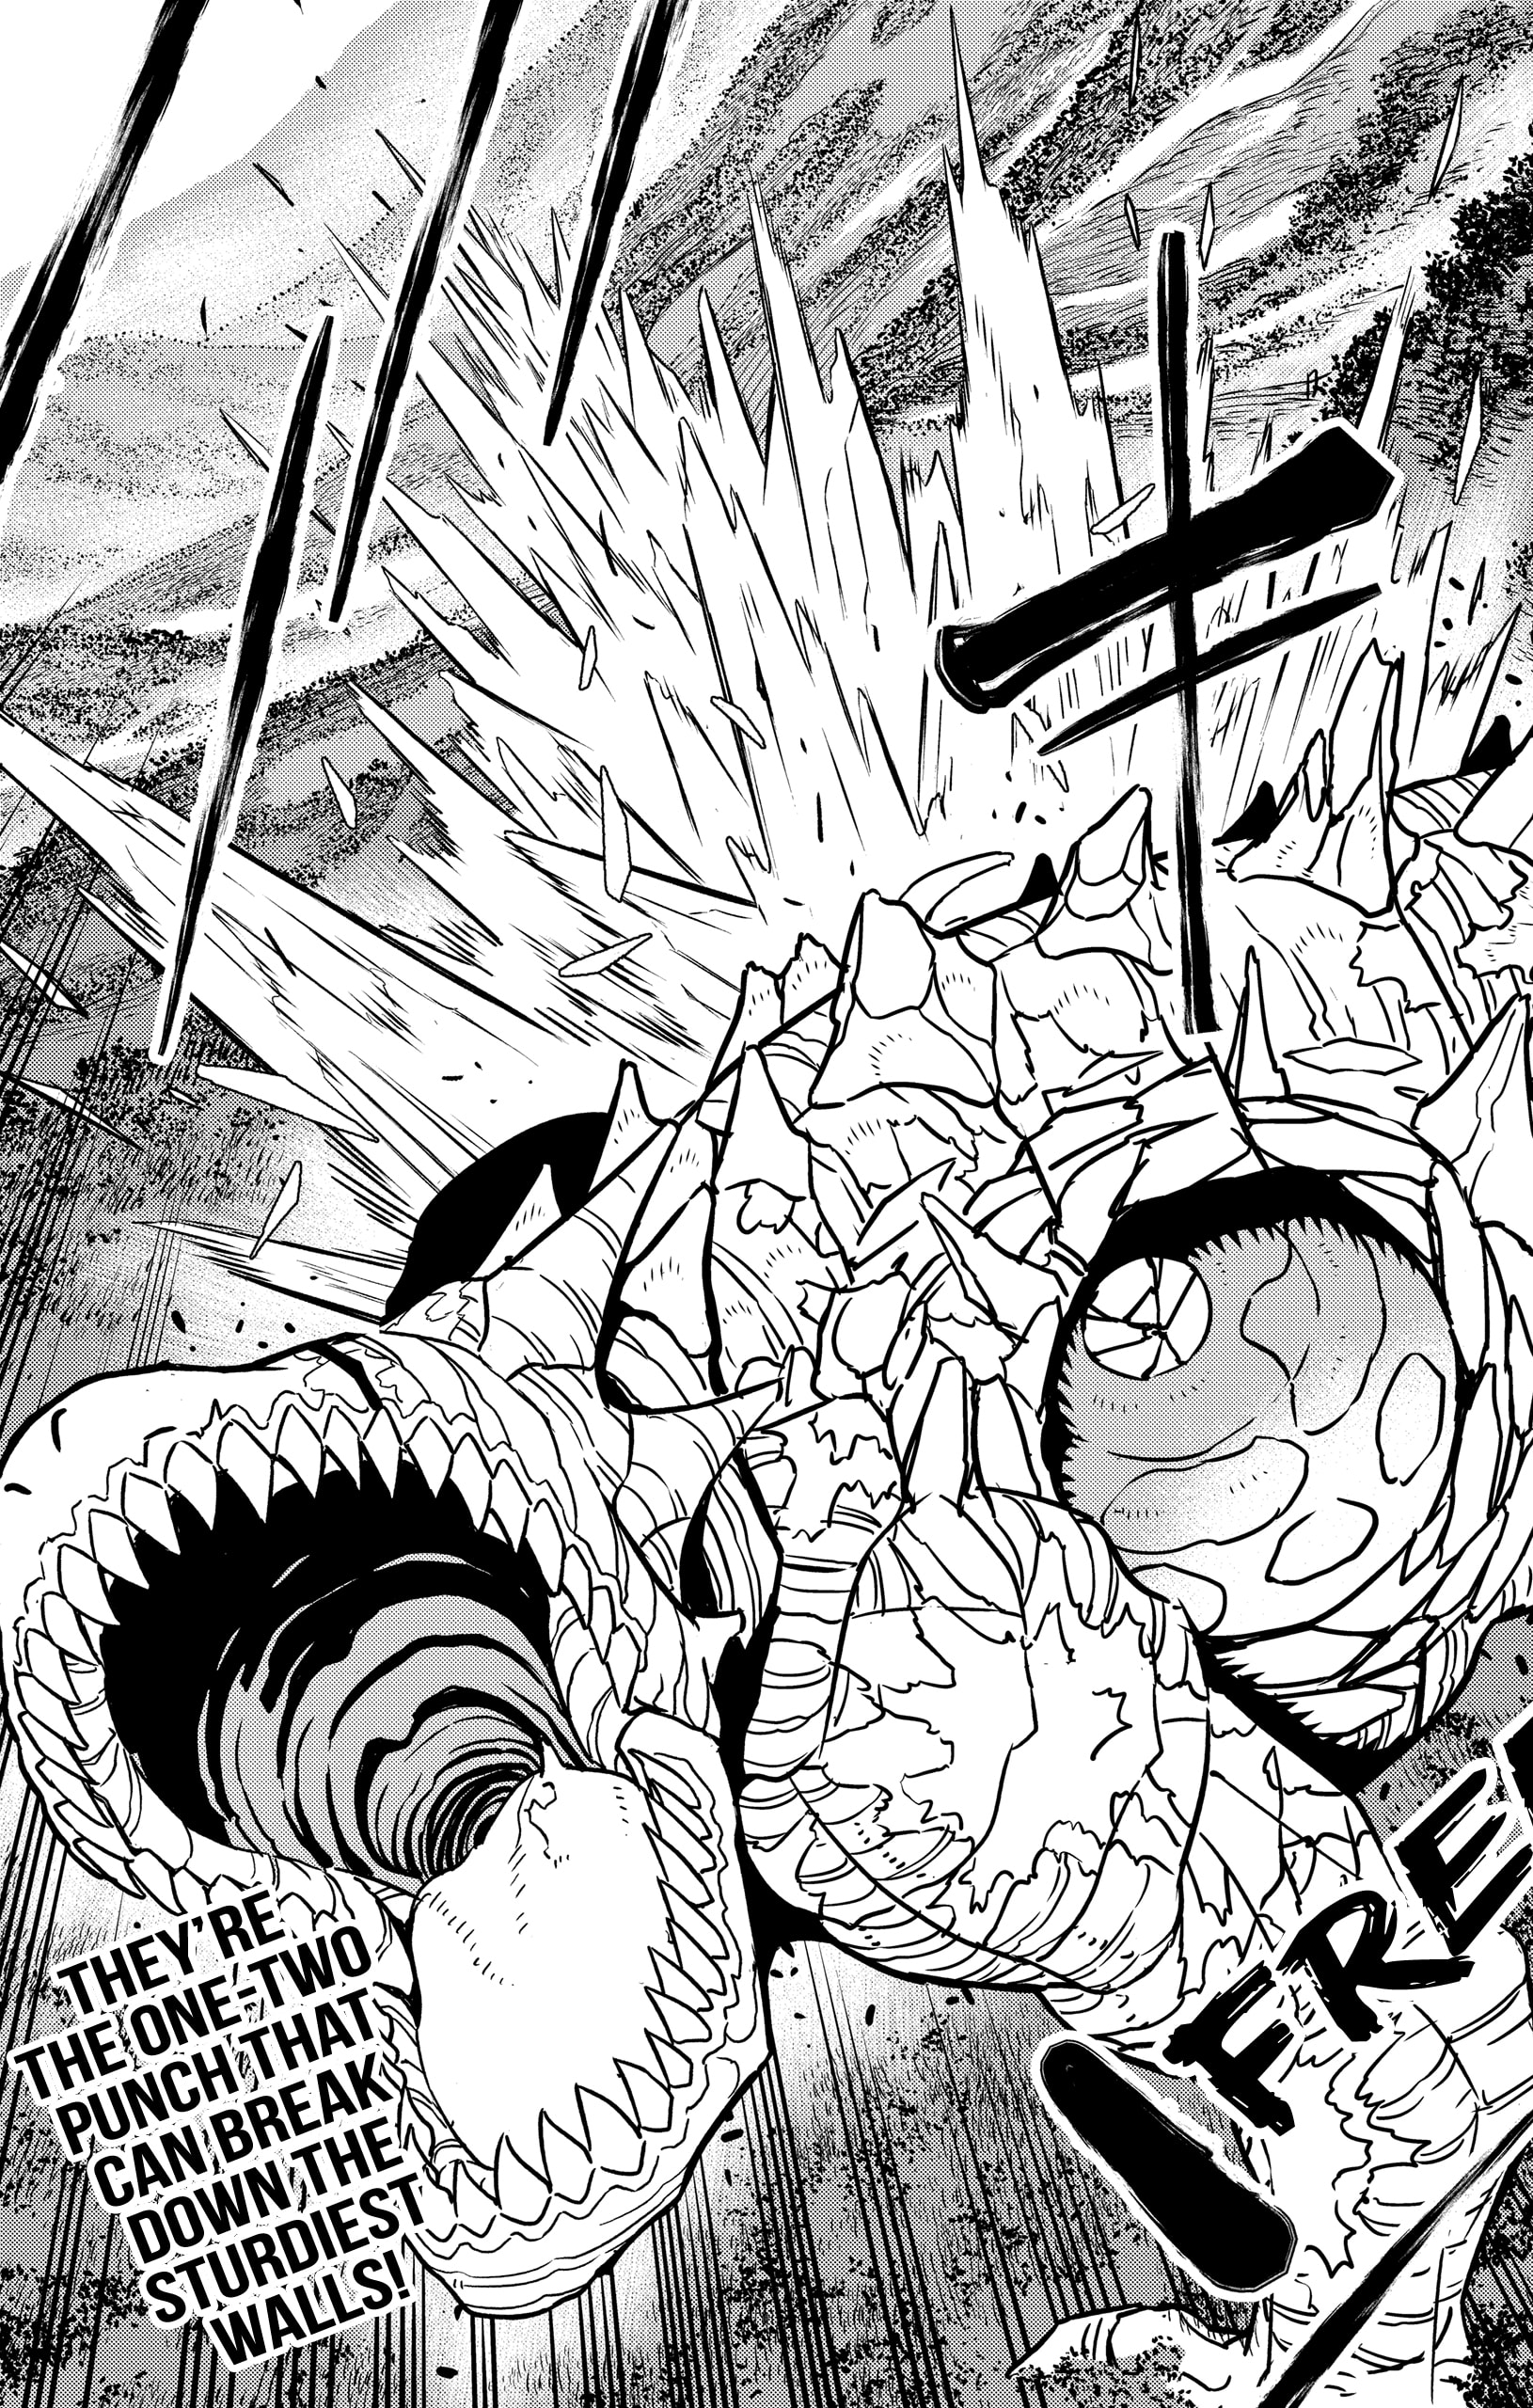 Kaiju no 8 Chapter 63, monster #8 chapter 63